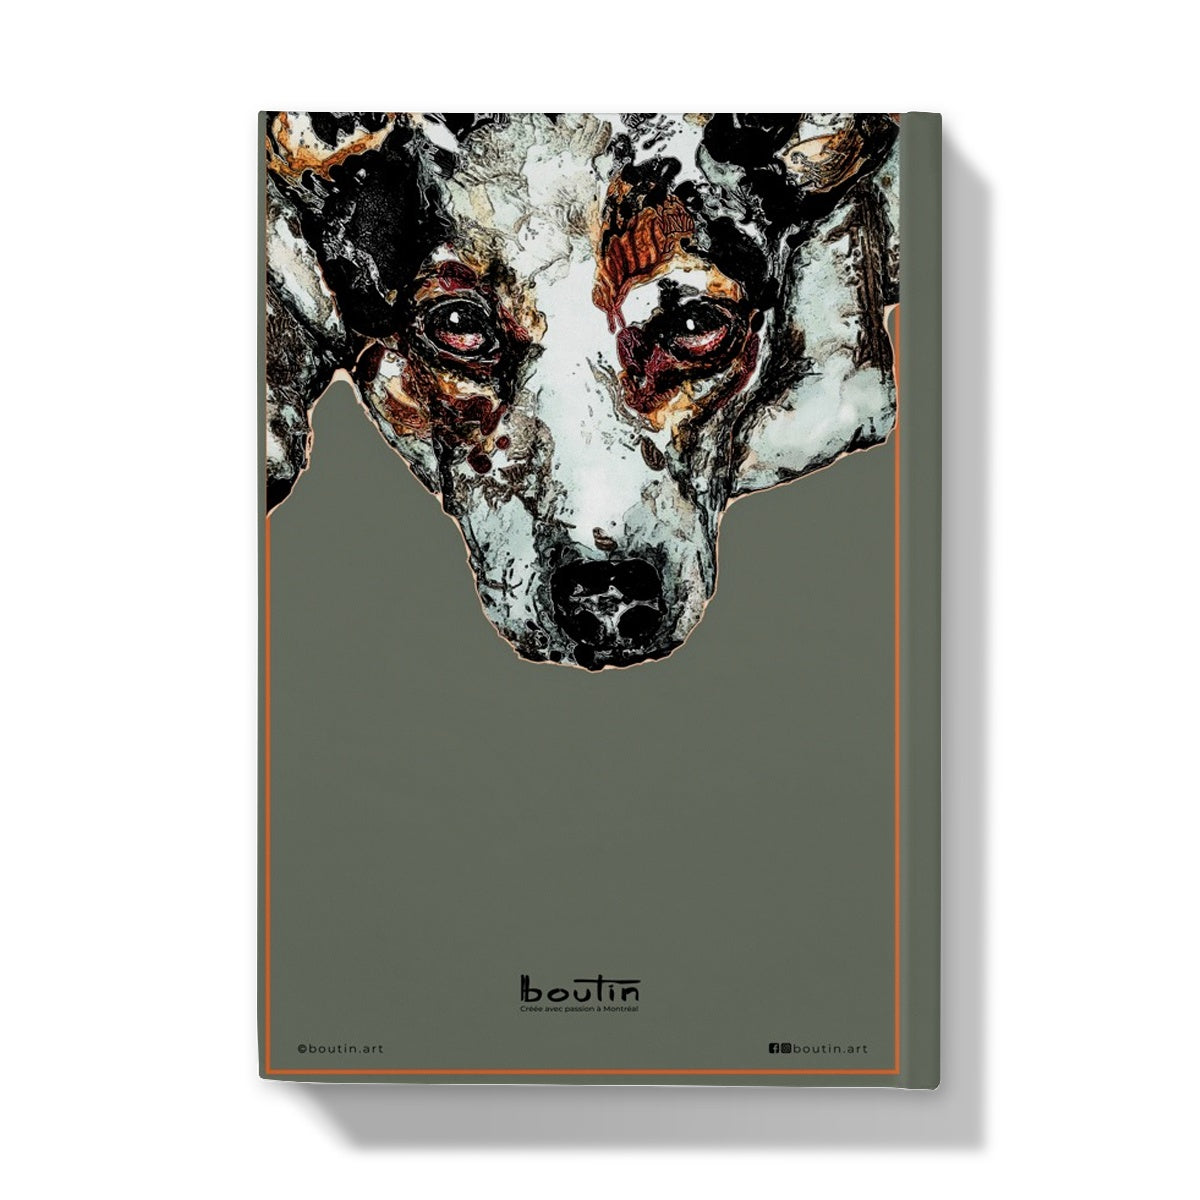 Russell moss - Notebook by the artist Boutin